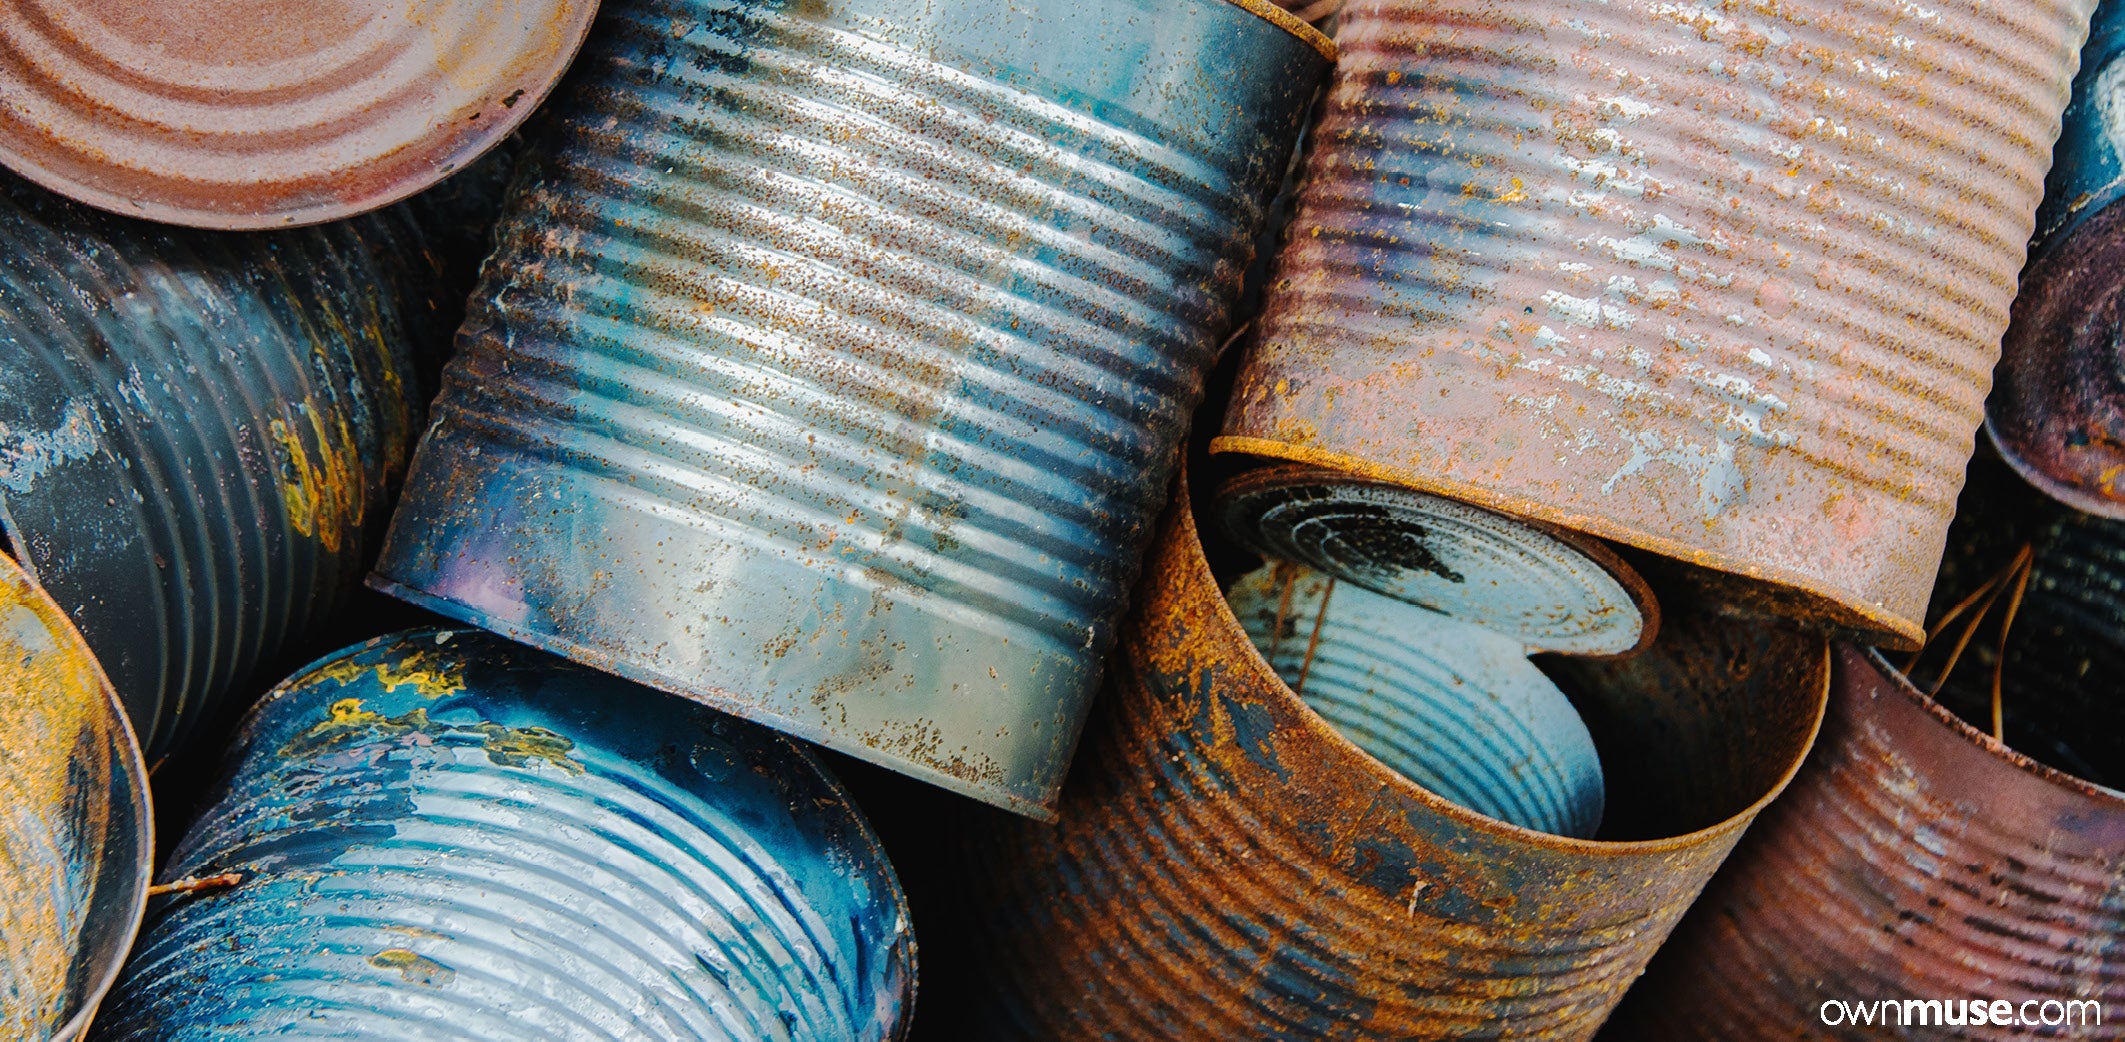 Aluminium cans and steel recycling